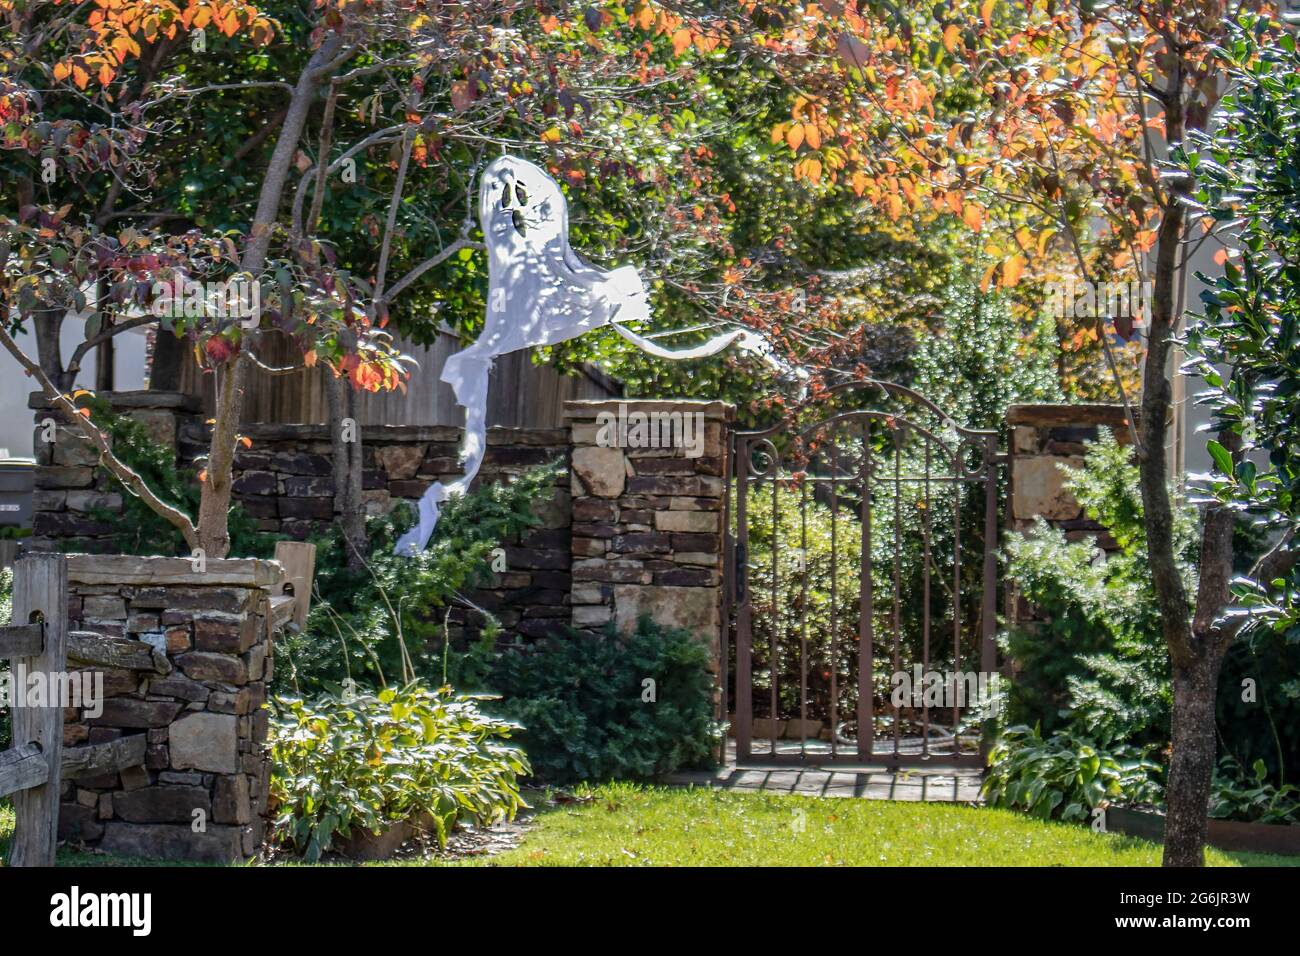 Halloween ghost decoration hanging from tree by garden gate with sun speckled and hokeh fall foliage around it. Stock Photo